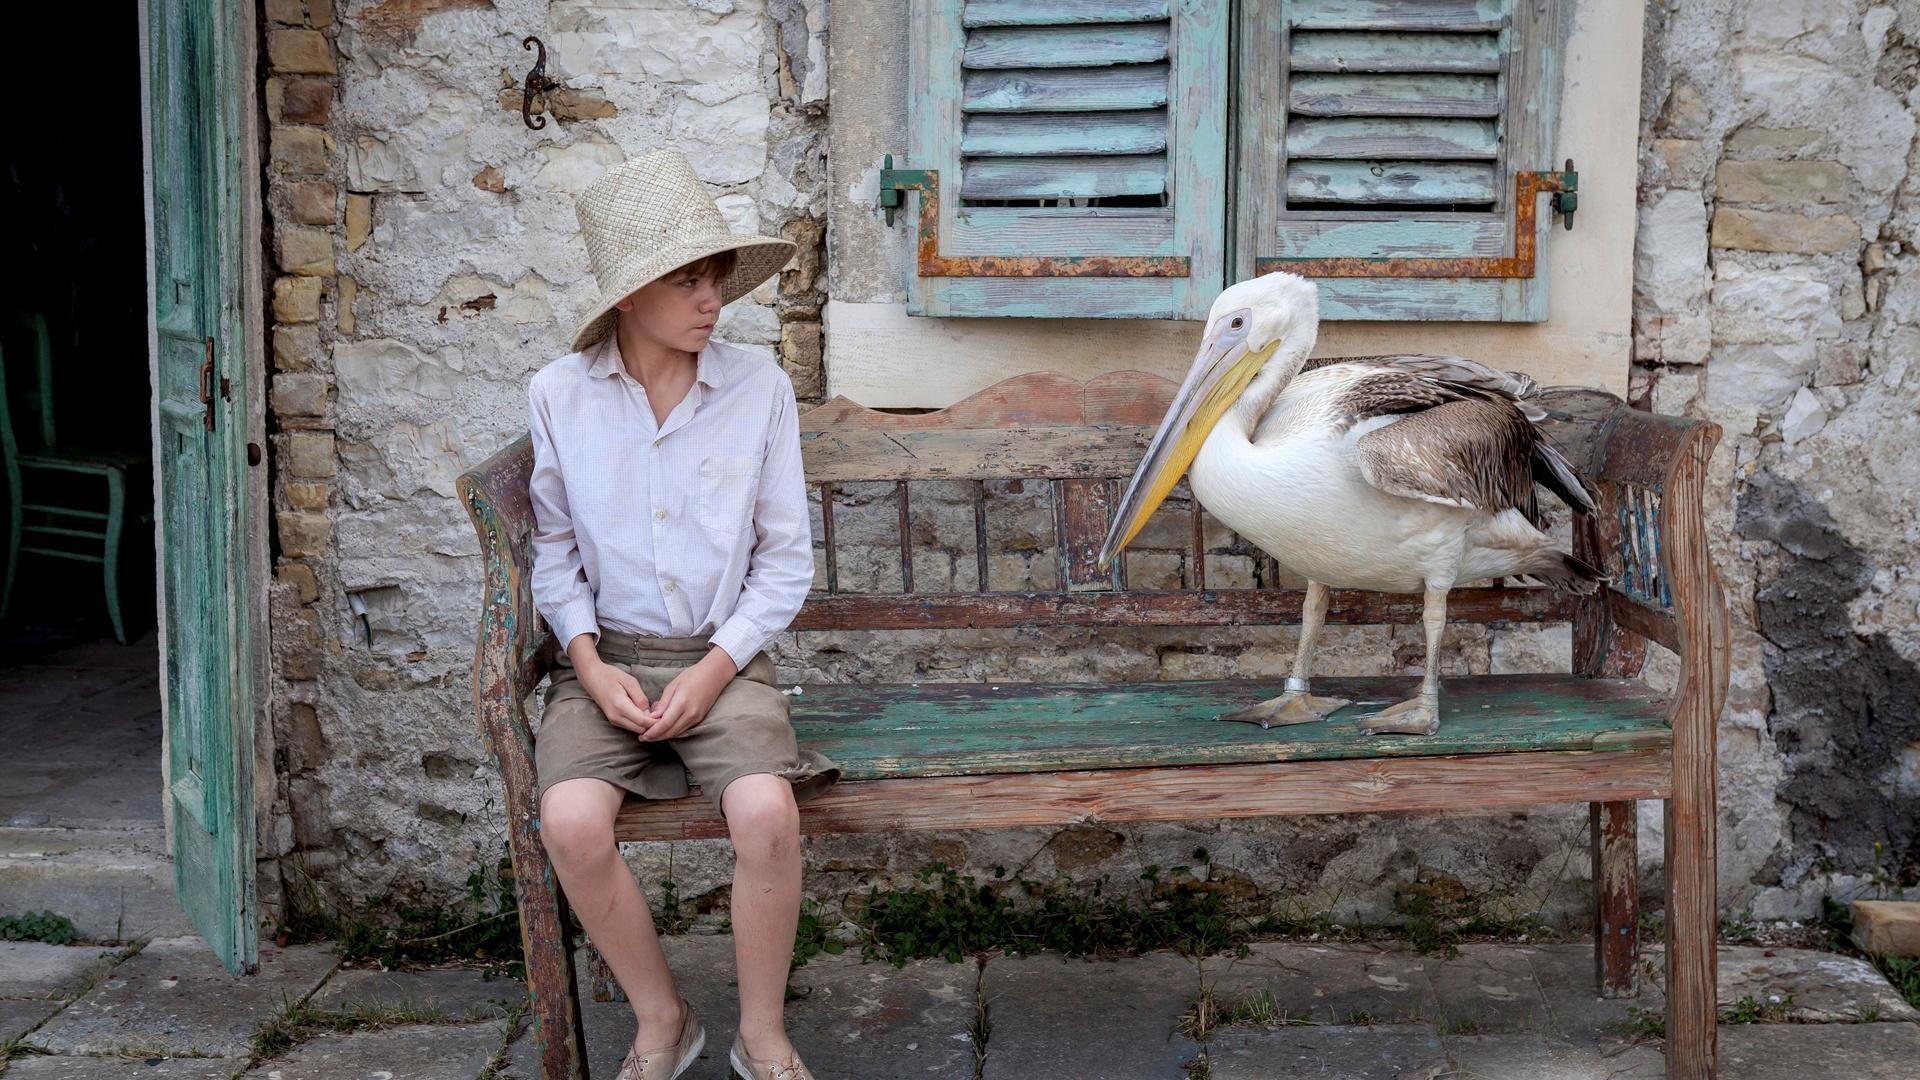 Gerry from “The Durrells in Corfu” sits next to a pelican.